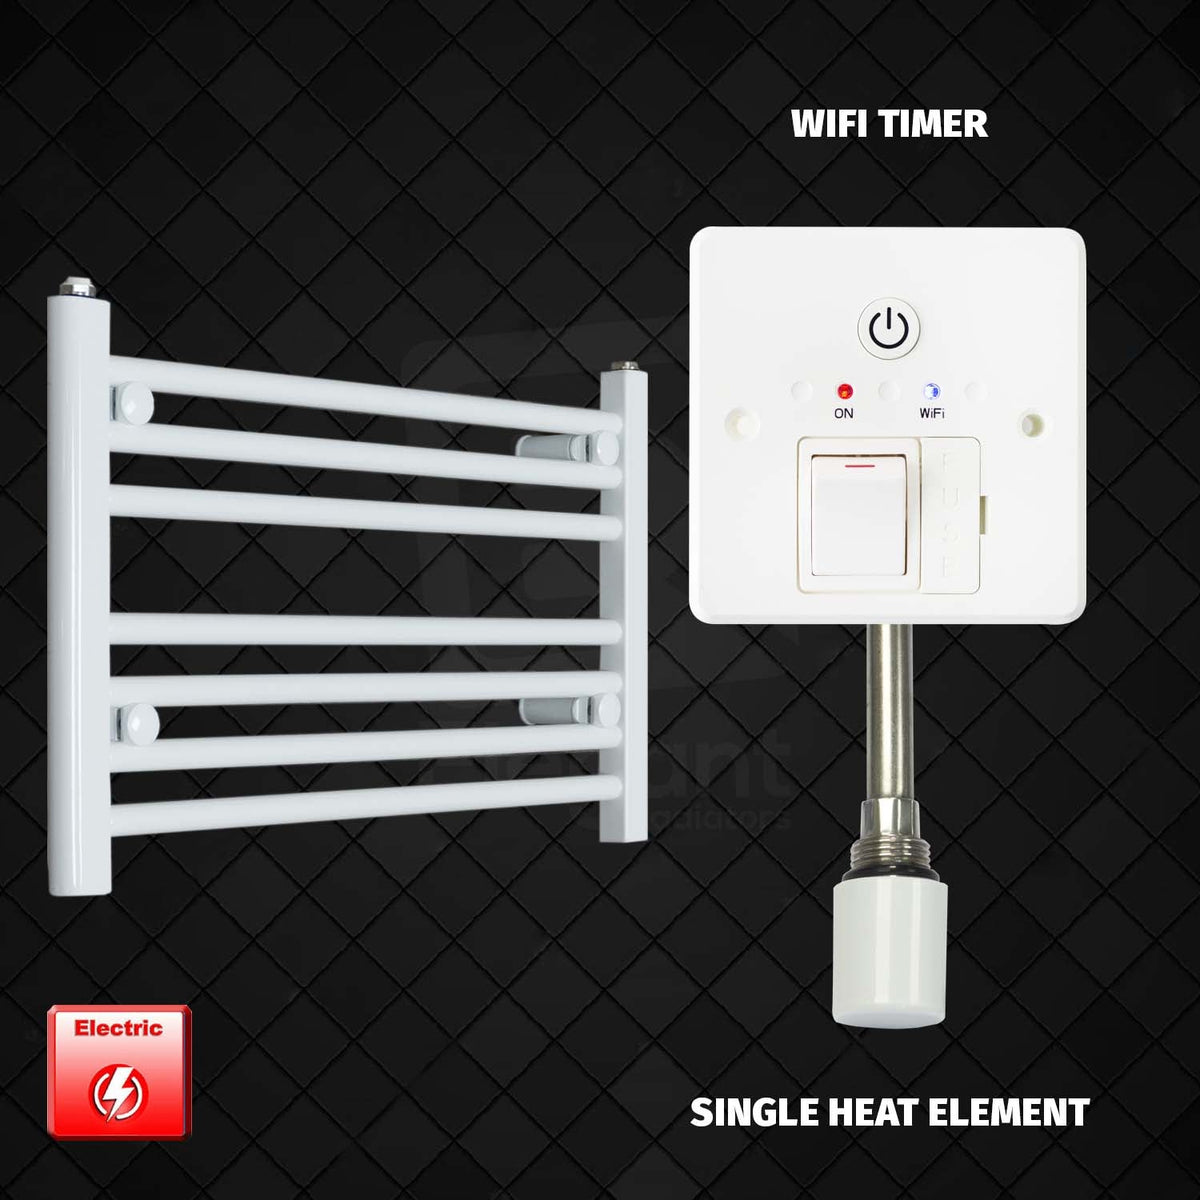 400 mm High 700 mm Wide Pre-Filled Electric Heated Towel Rail Radiator White HTR Single heat element Wifi timer